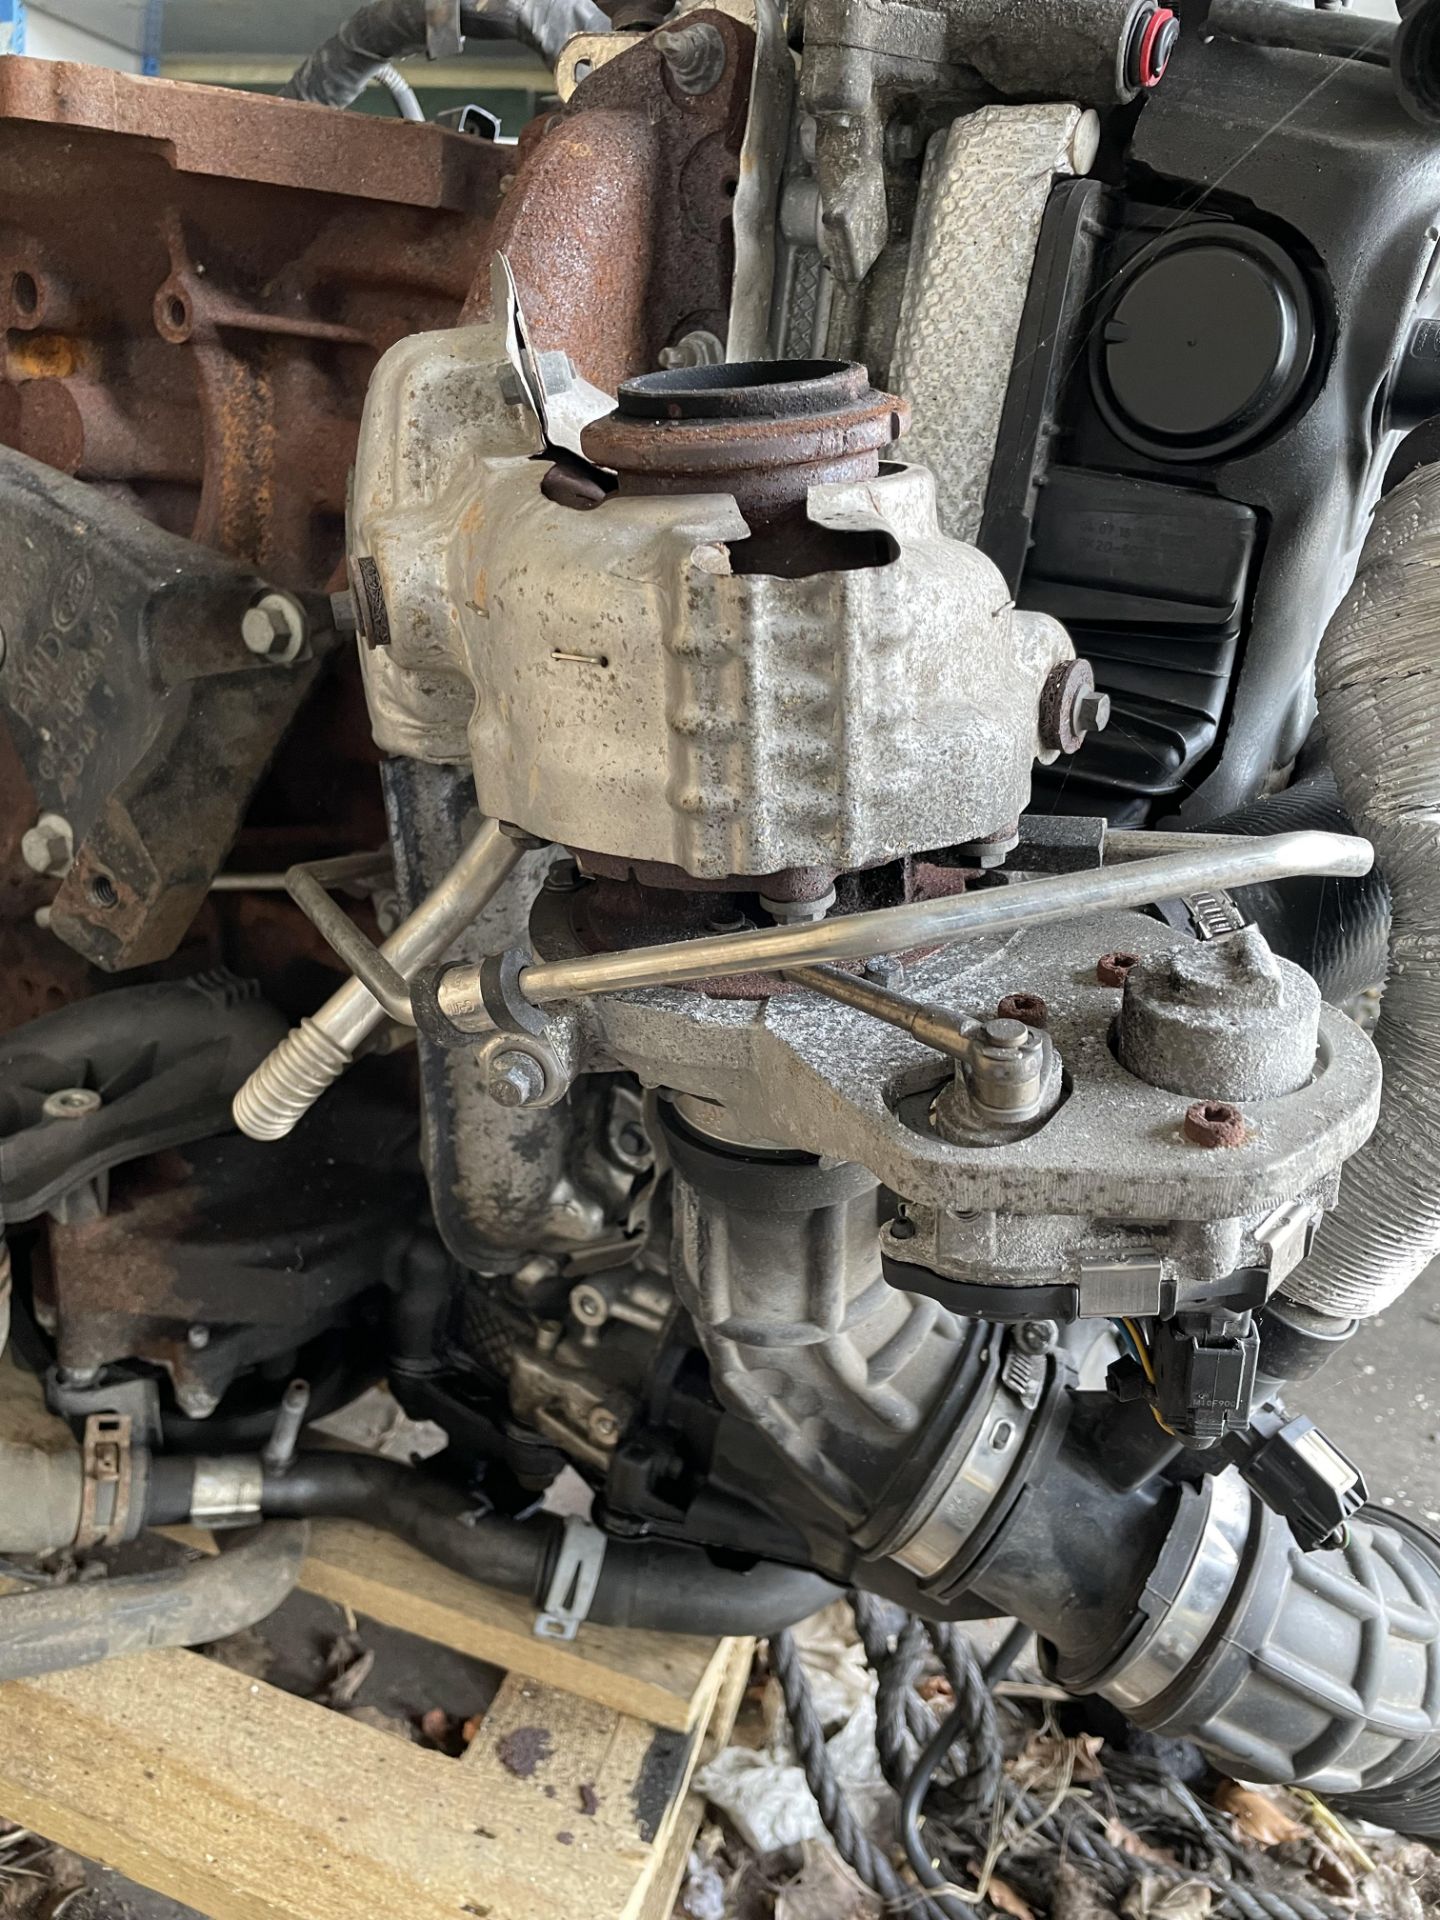 2018 Ford Transit engine (sold as seen - hairline crack to cylinder head)(Collection from TOWN END - Image 6 of 7